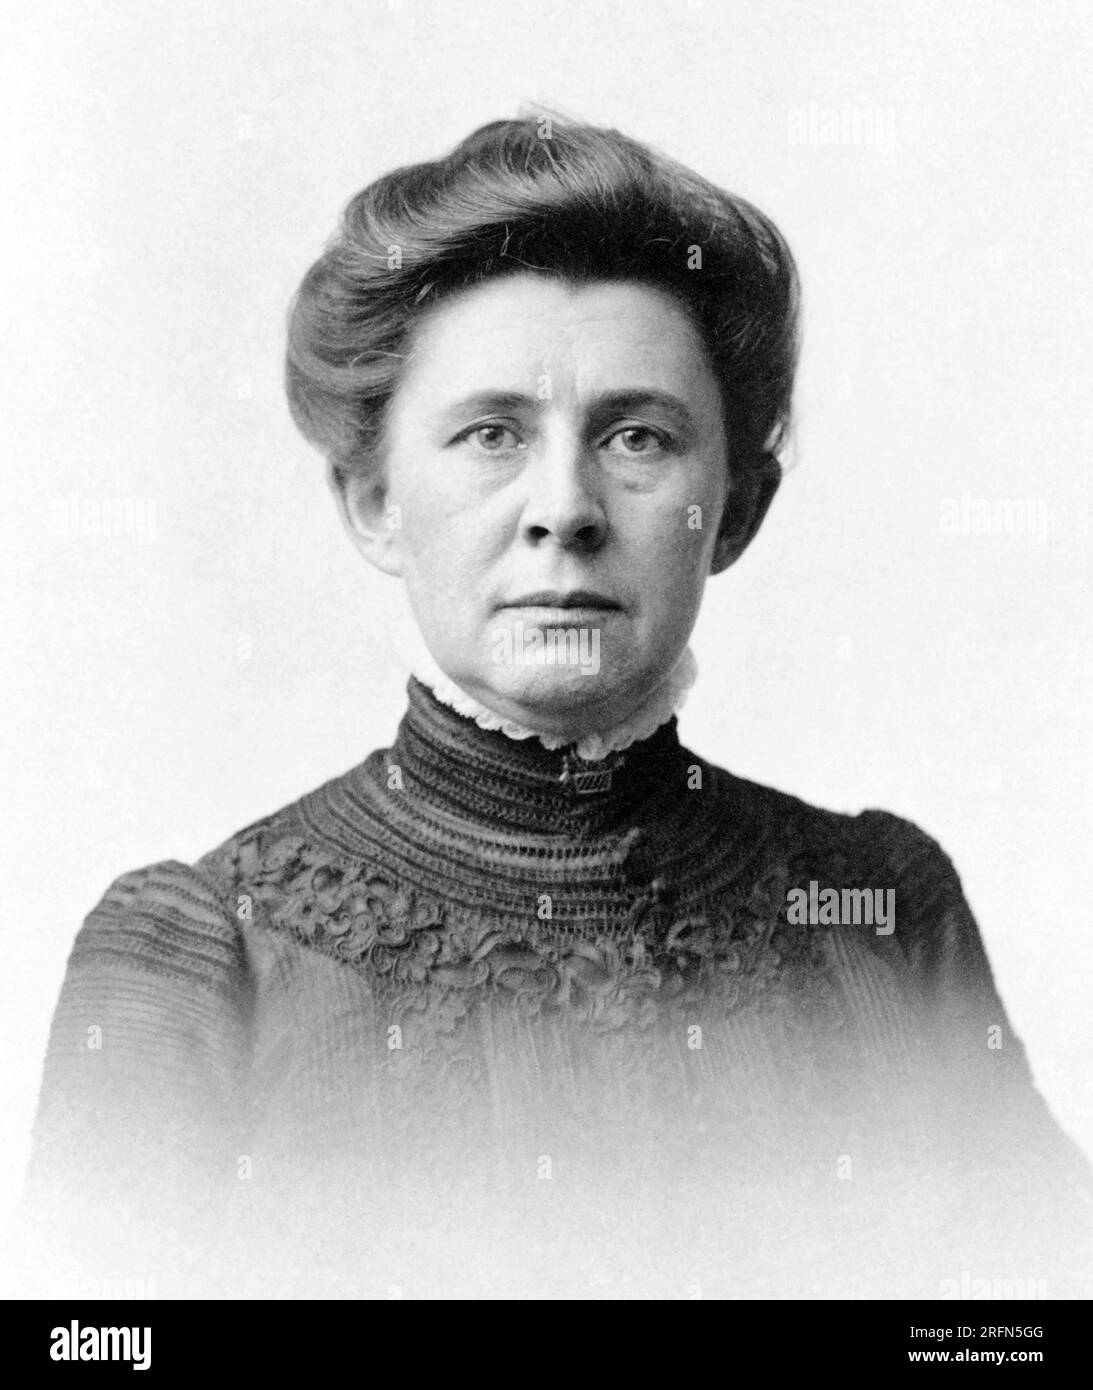 Ida Tarbell (1857-1944) was an American writer and pioneer of investigative journalism, best known for her 1904 book The History of the Standard Oil Company, a work that contributed to the dissolution of the Standard Oil monopoly and helped usher in the Hepburn Act of 1906, the Mann-Elkins Act, the creation of the Federal Trade Commission (FTC), and passage of the Clayton Antitrust Act. Photo, c. 1904 by James E. Purdy. Stock Photo